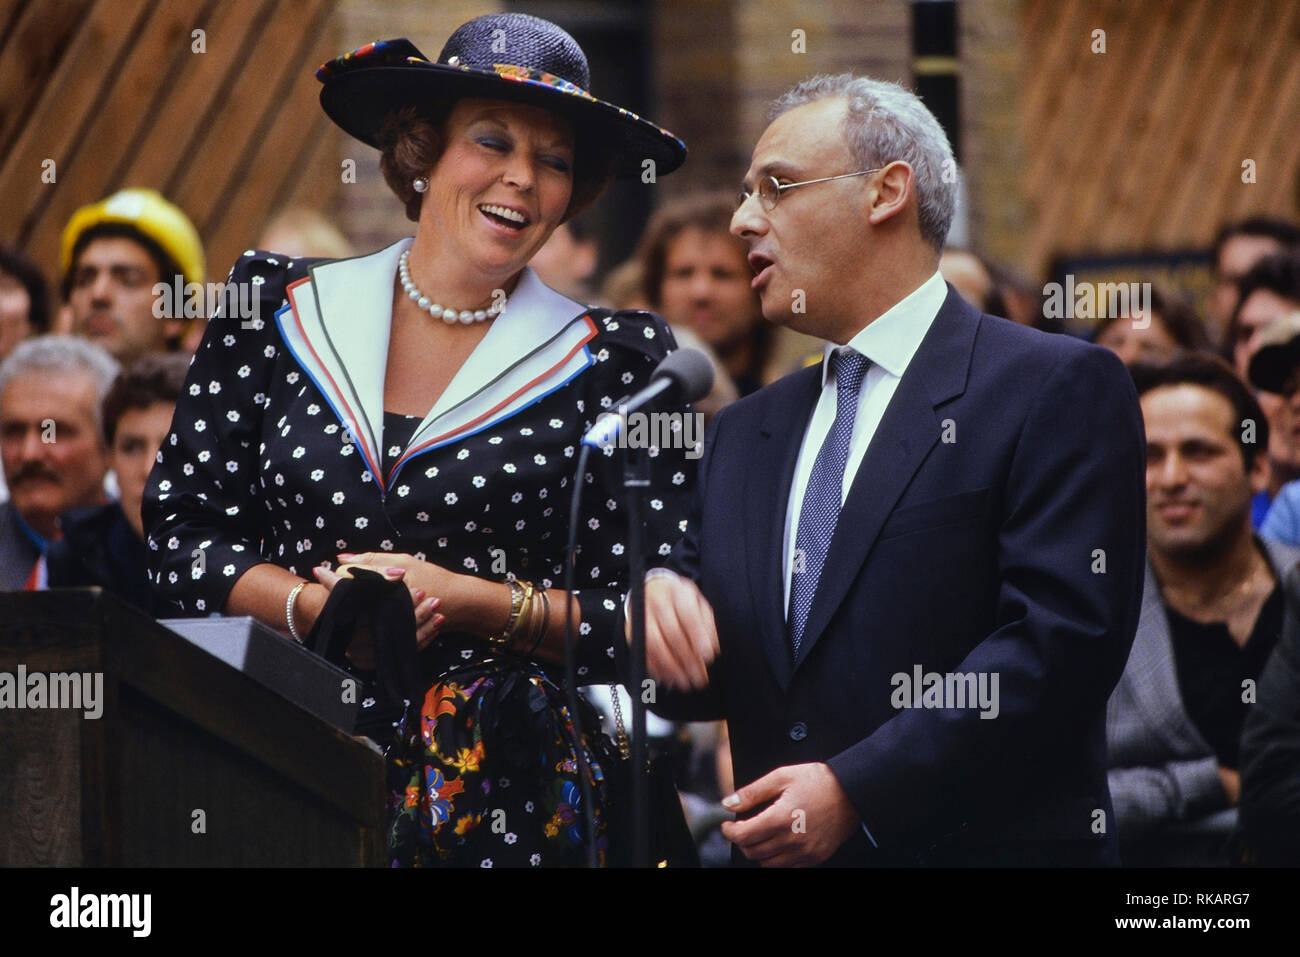 Queen Beatrix of the Netherlands unveiling the Seven Dials monument, Covent garden, London. England. 29th June 1989 Stock Photo